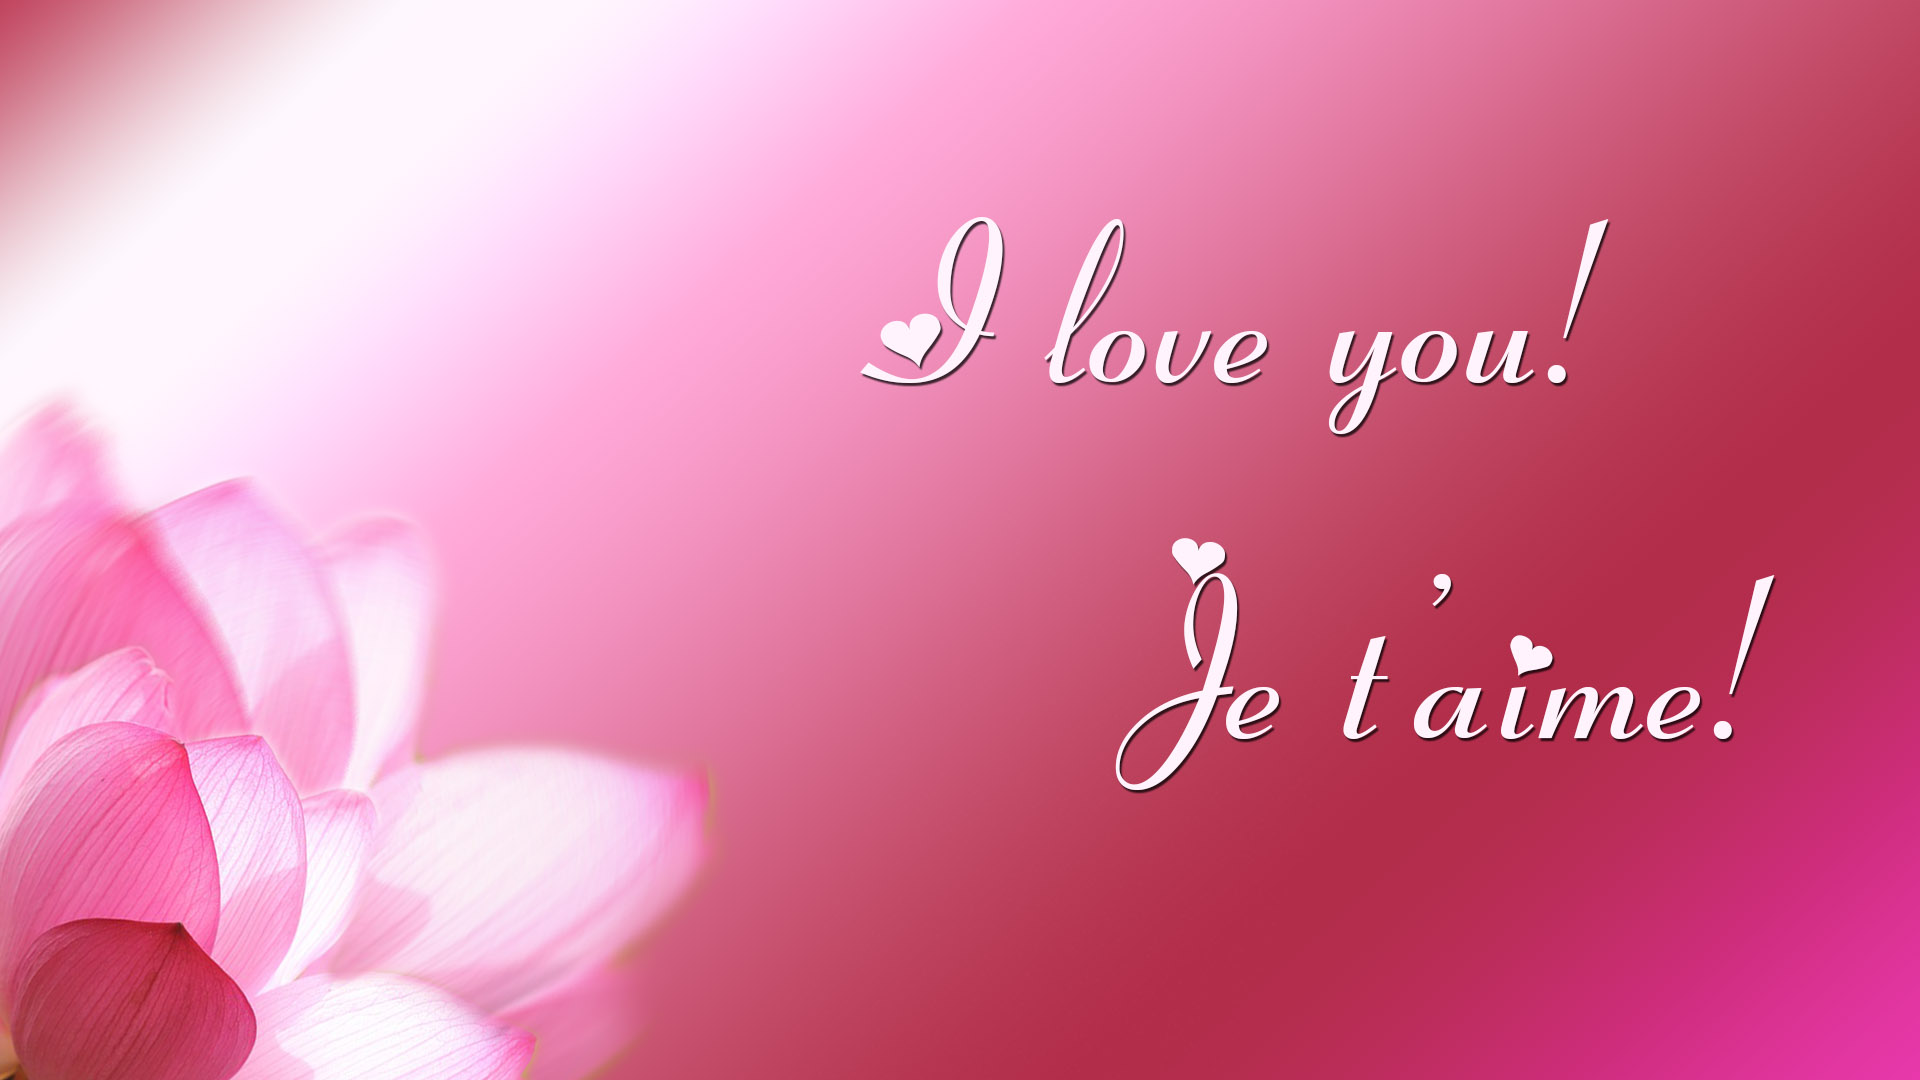 Abstract Artistic Colors Digital Art Gradient Pink Typography Valentine 039 S Day 1920x1080